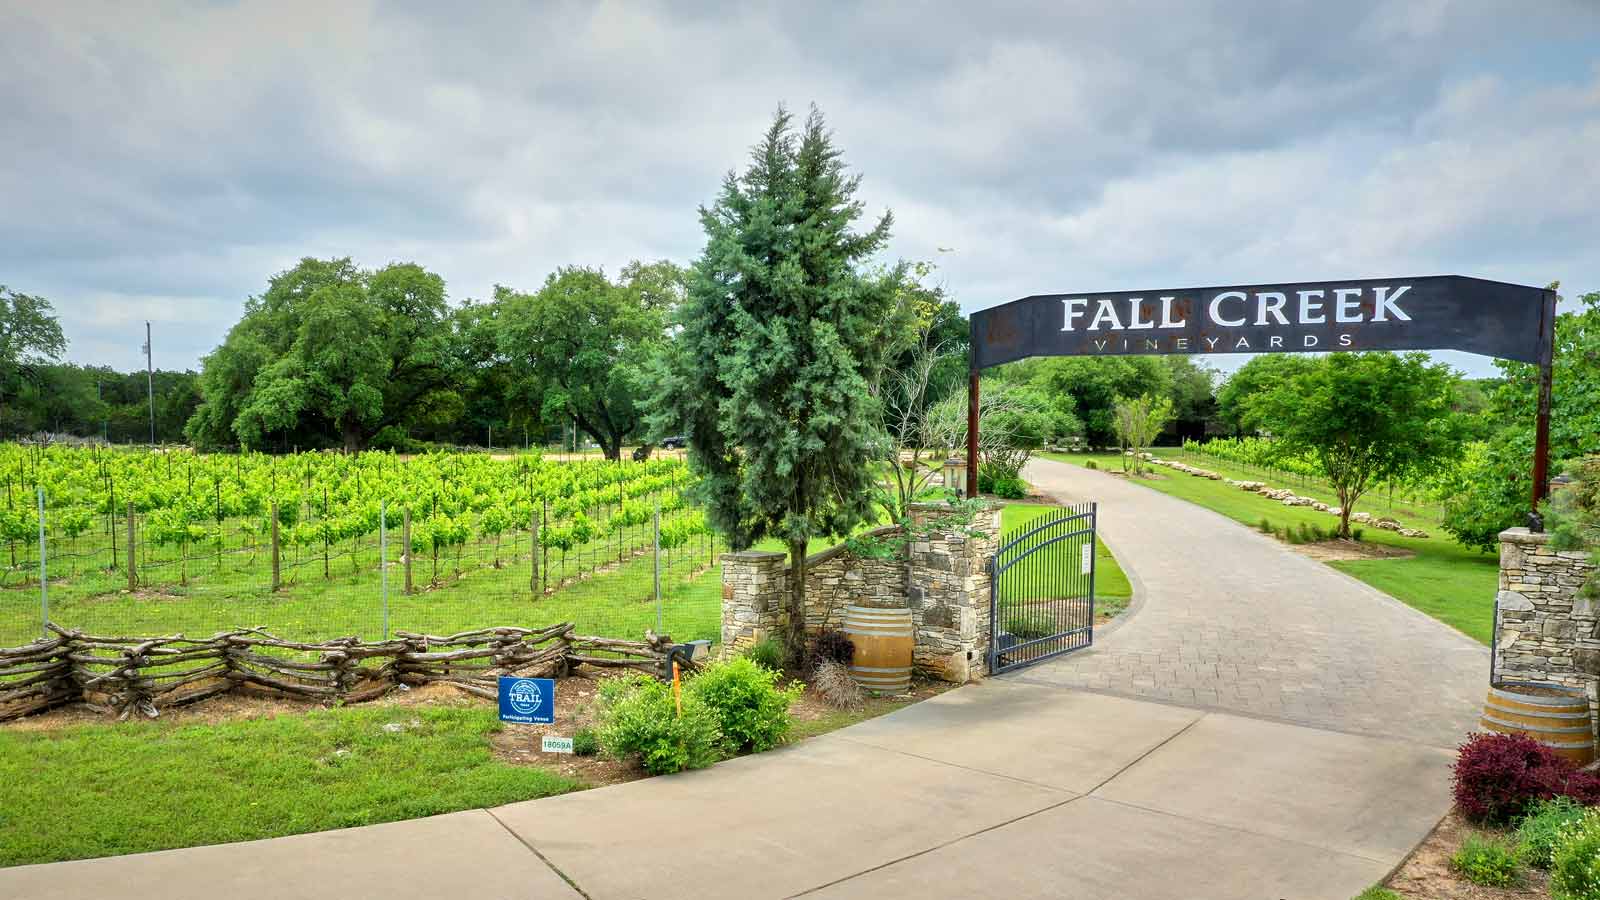 <p><em>Address: 18059 Farm to Market Rd 1826, Driftwood, TX 78619</em></p><p>Located in Driftwood, Texas, they are the first pioneers of the TX Hill Country wine-growing tradition. <a href="https://fcv.com/driftwood" rel="nofollow noopener">Owners Ed and Susan Auler</a> were influenced by their 1973 trip to France to learn about cattle operations for their ranch. Instead, they spent the next several days falling in love with the French wine country from Reims to Burgundy to Rhone across the south of France to Bordeaux.</p><p>The Double Gold winning Meritus, made from their proprietary blend of premium Texas-grown red Bordeaux grape varieties, pairs perfectly with a savory meal of Texas beef.</p>